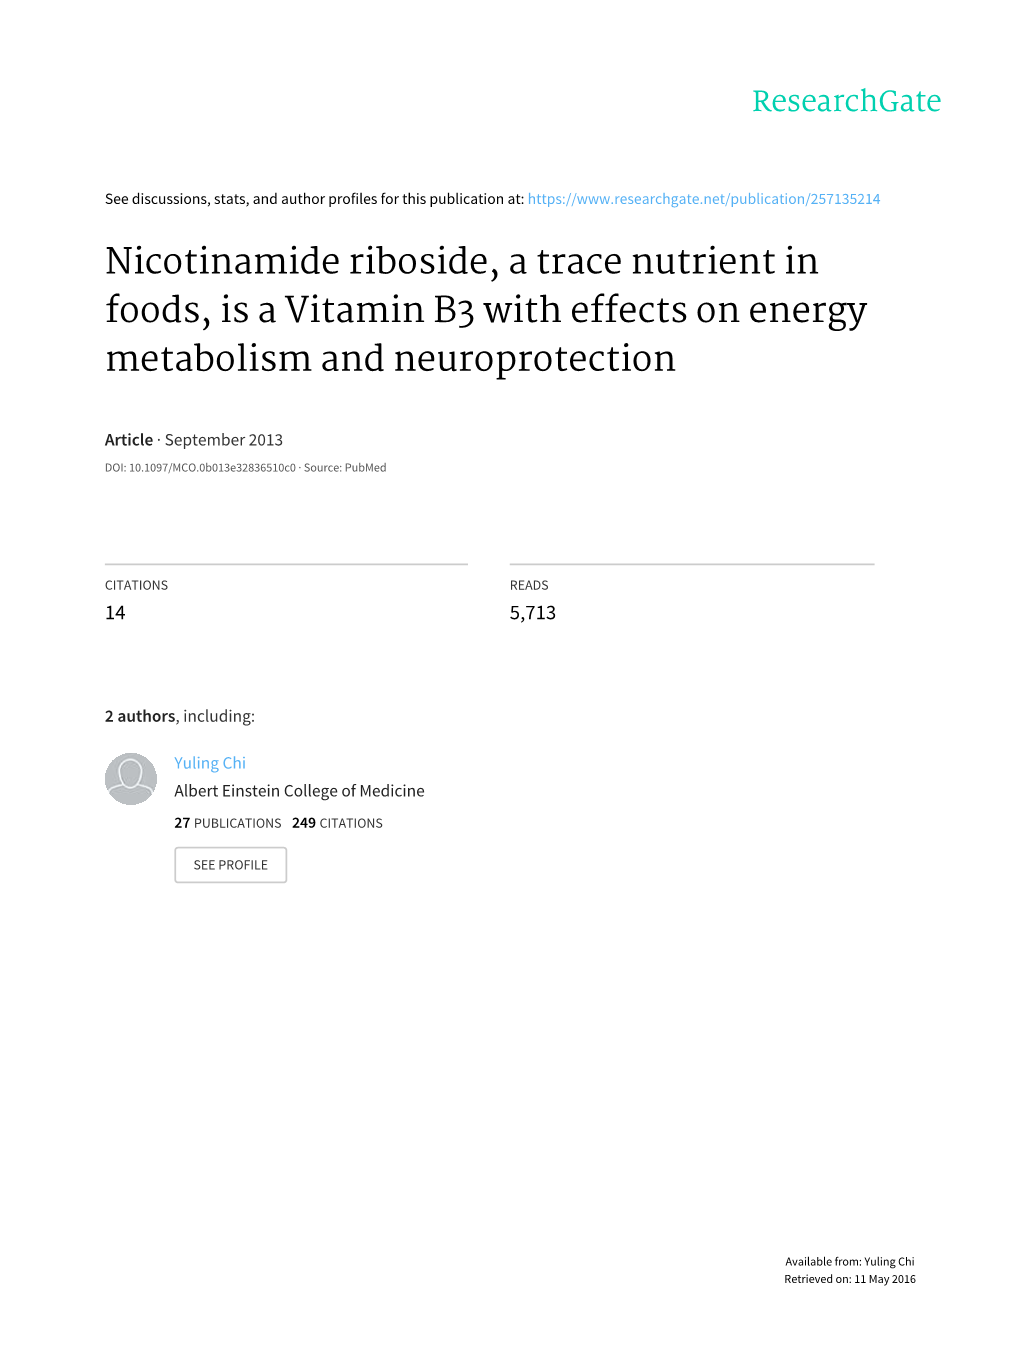 Nicotinamide Riboside, a Trace Nutrient in Foods, Is a Vitamin B3 with Effects on Energy Metabolism and Neuroprotection